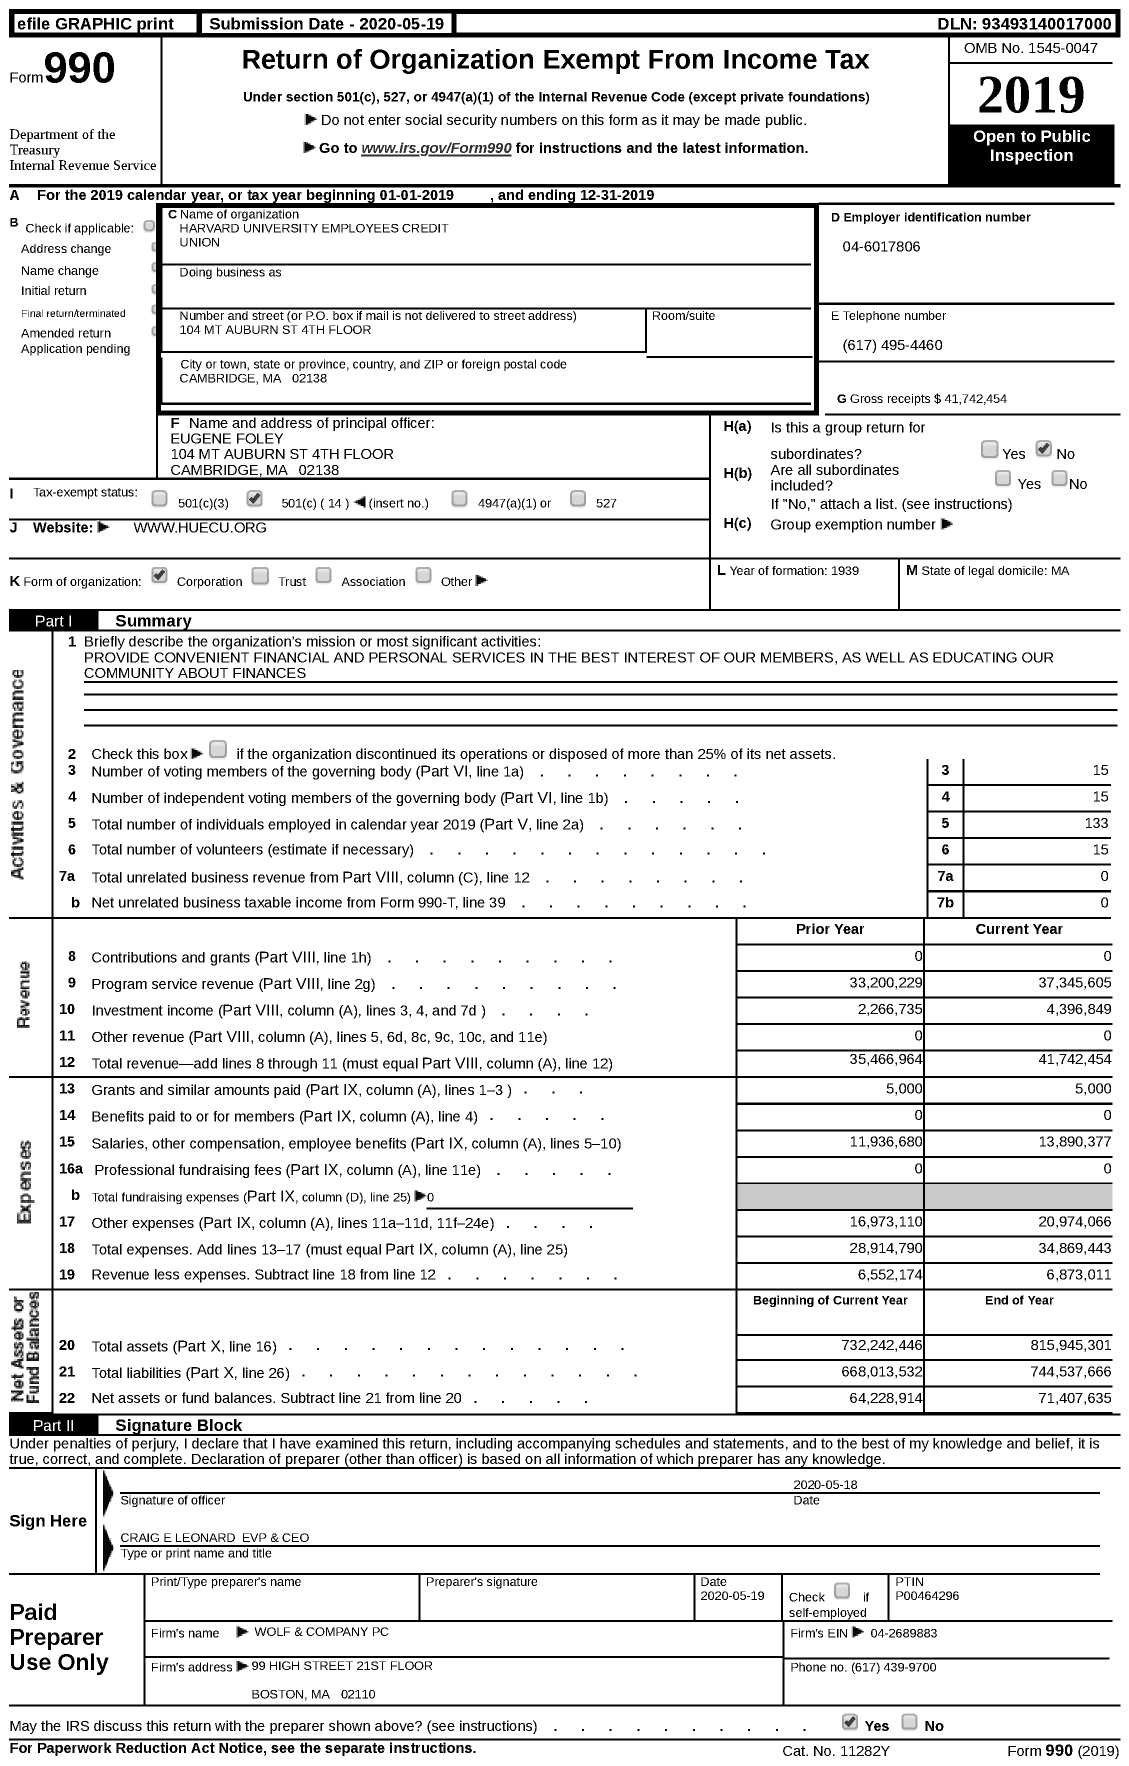 Image of first page of 2019 Form 990 for Harvard University Employees Credit Union (HUECU)